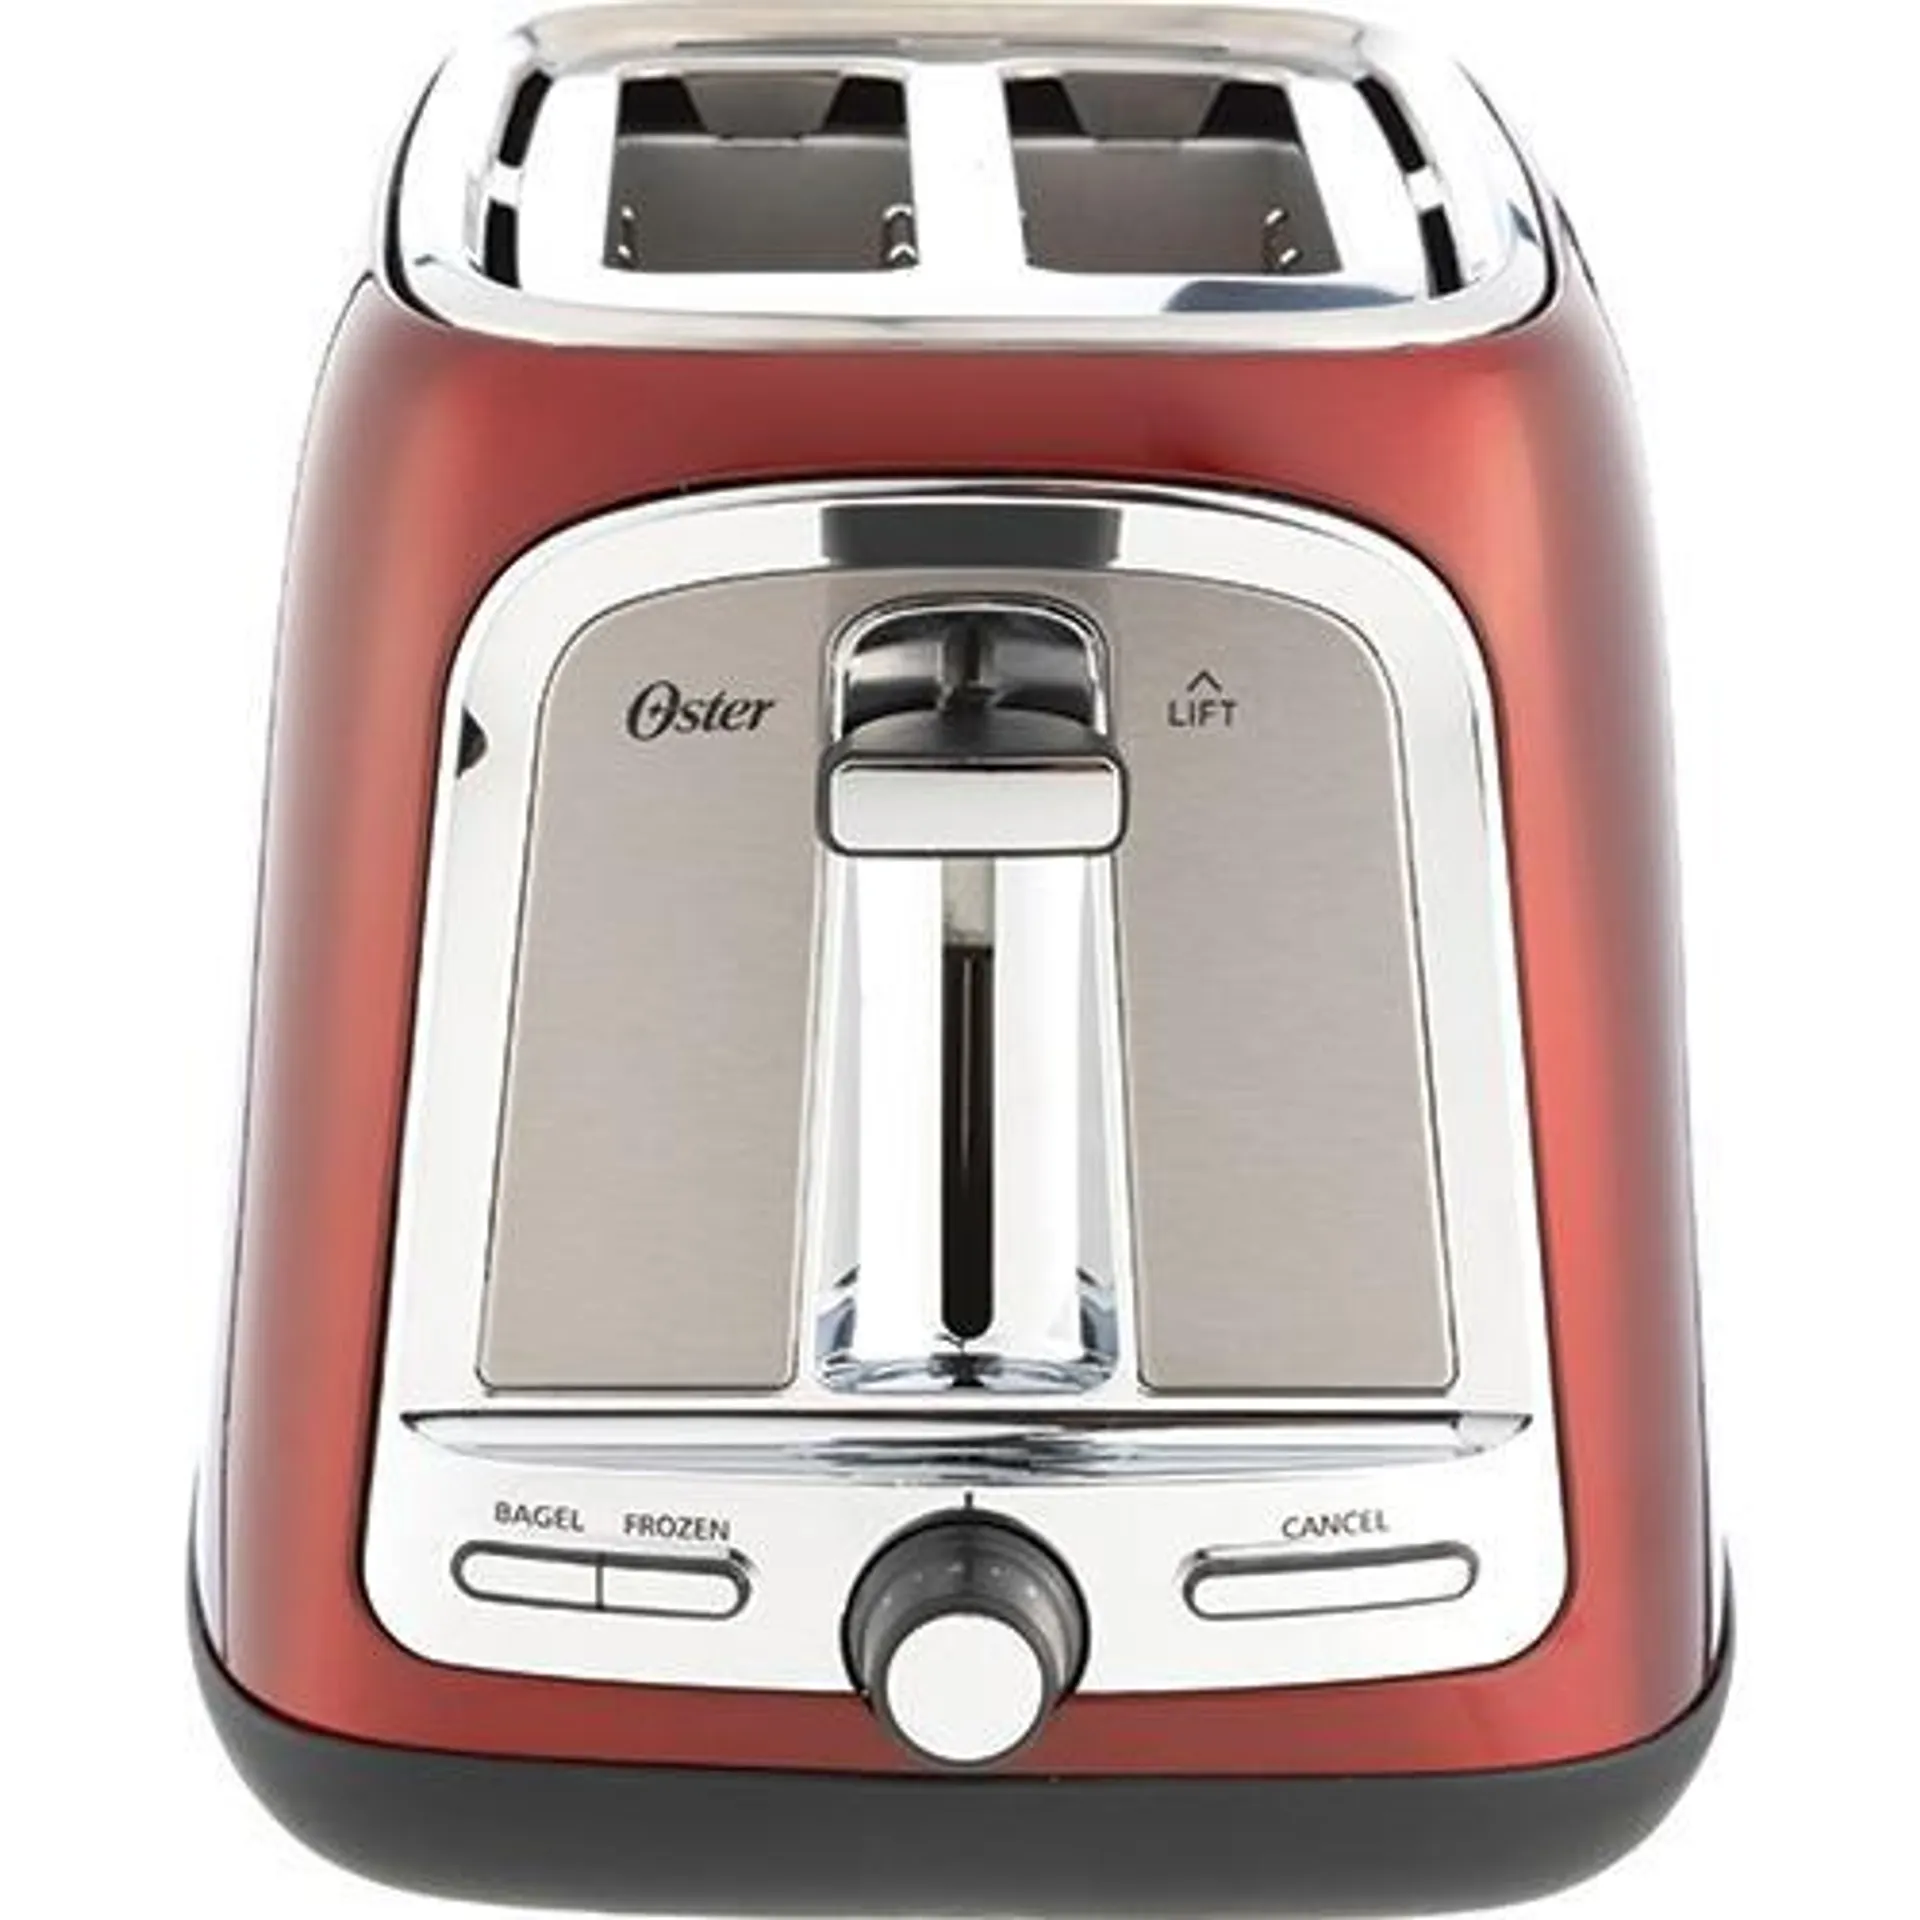 2-Slice Toaster With Advanced Toast Technology - Candy Apple Red